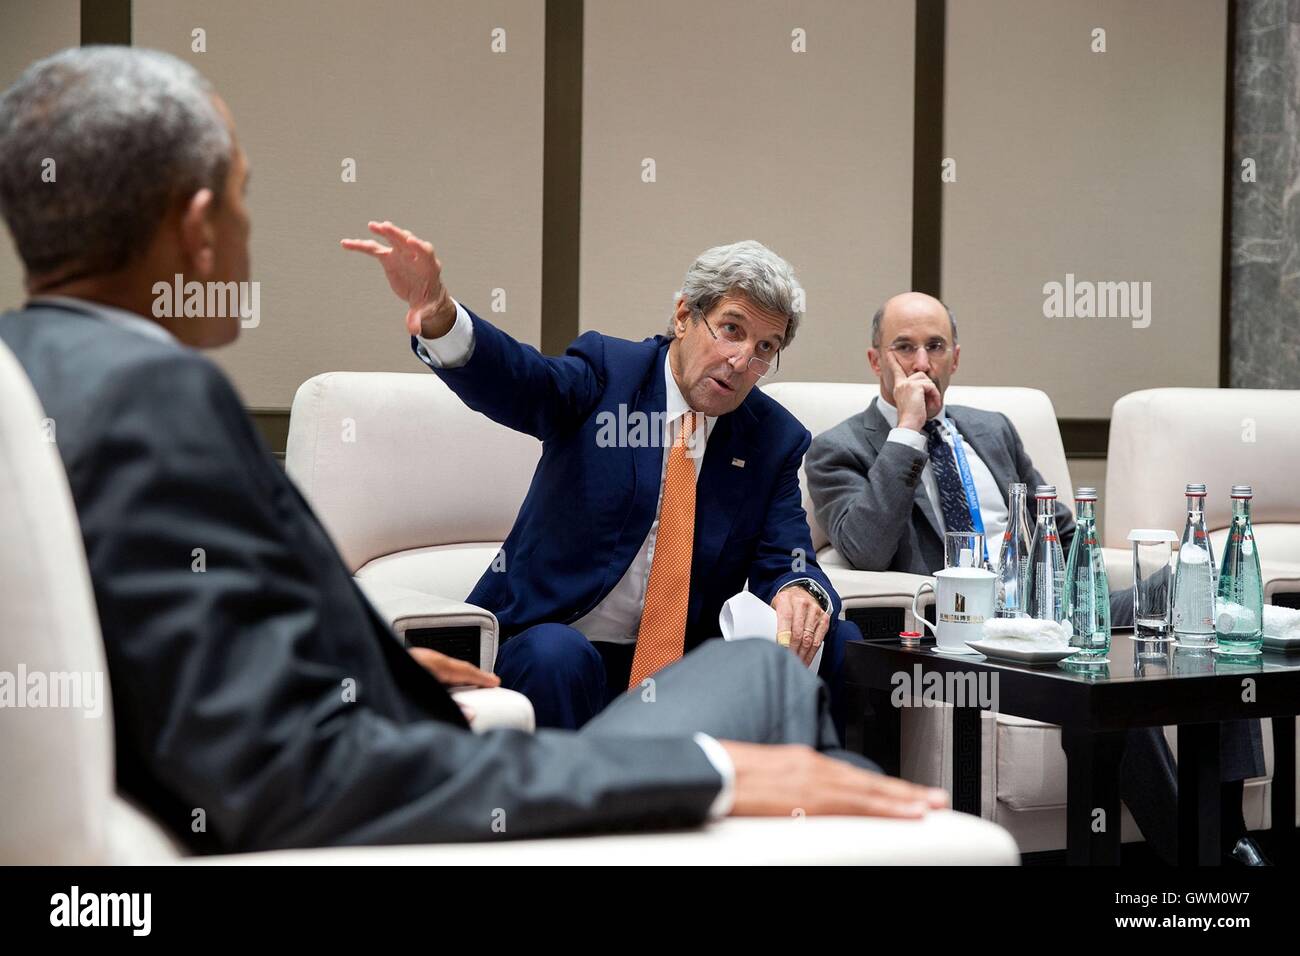 U.S President Barack Obama meets with Secretary of State John Kerry and Rob Malley following a G20 Summit session at the International Expo Center in Hangzhou, China September 4, 2016. Stock Photo